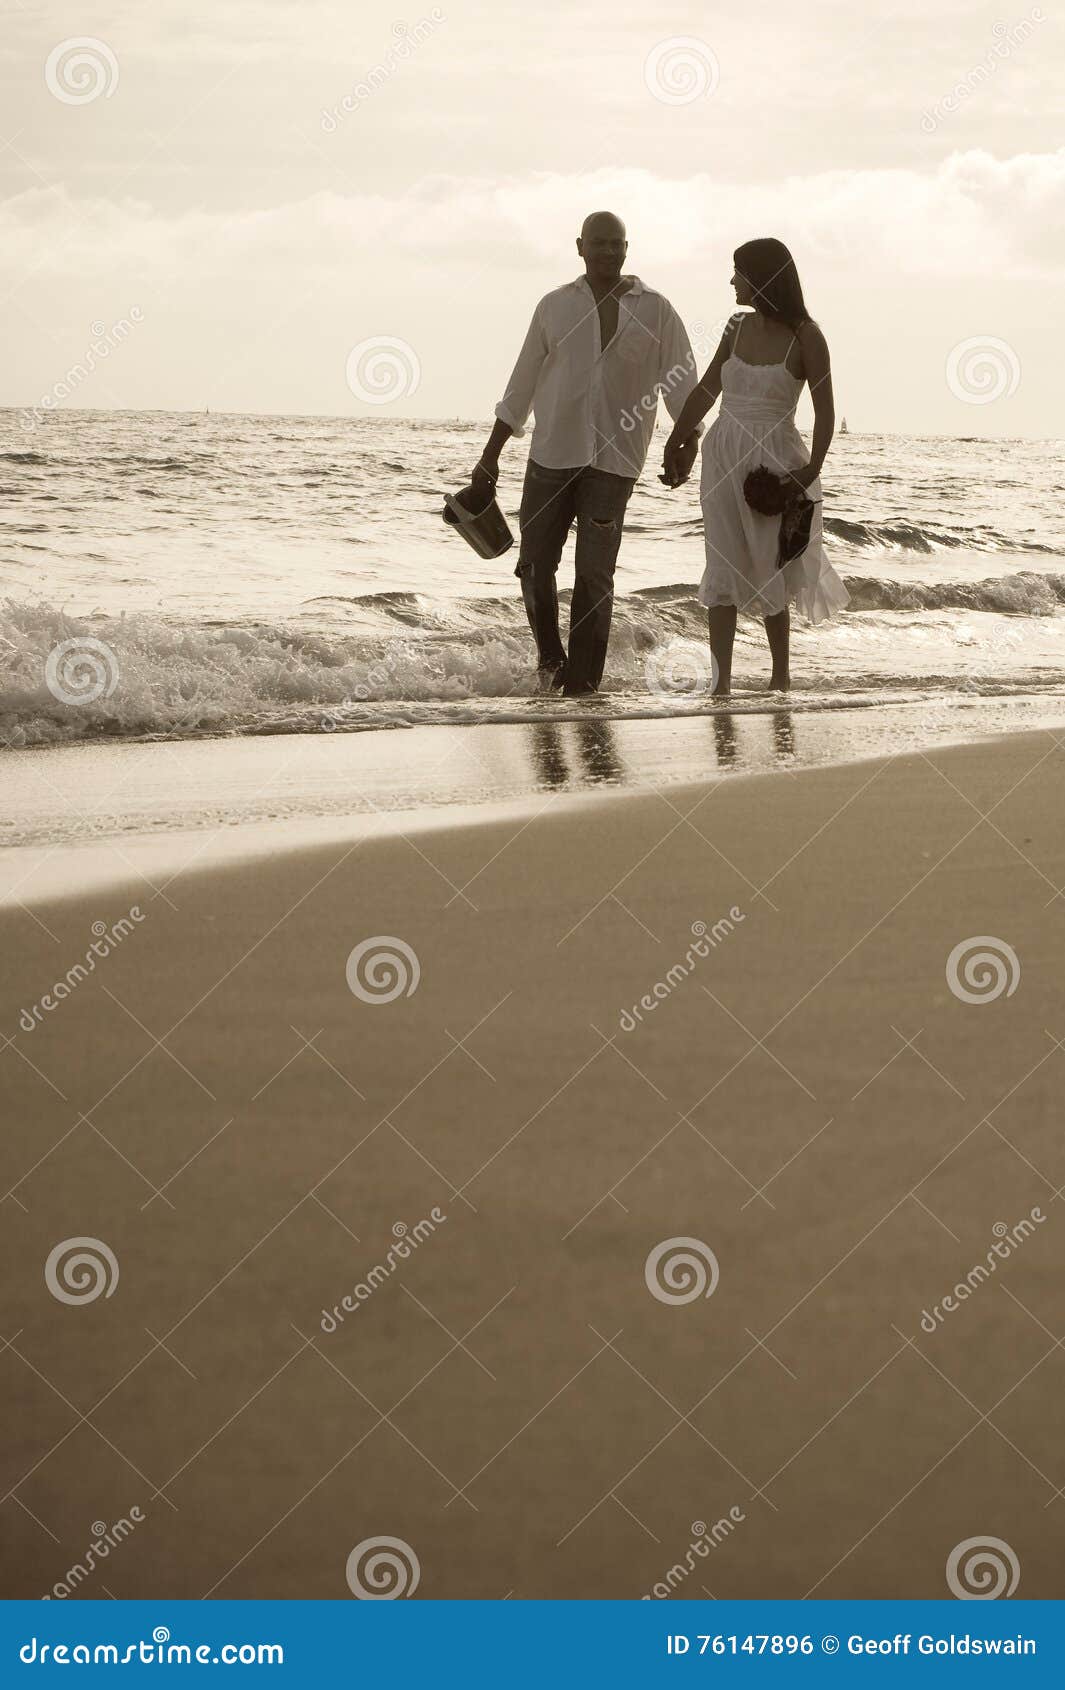 1 165 Indian Couple Holding Hands Photos Free Royalty Free Stock Photos From Dreamstime